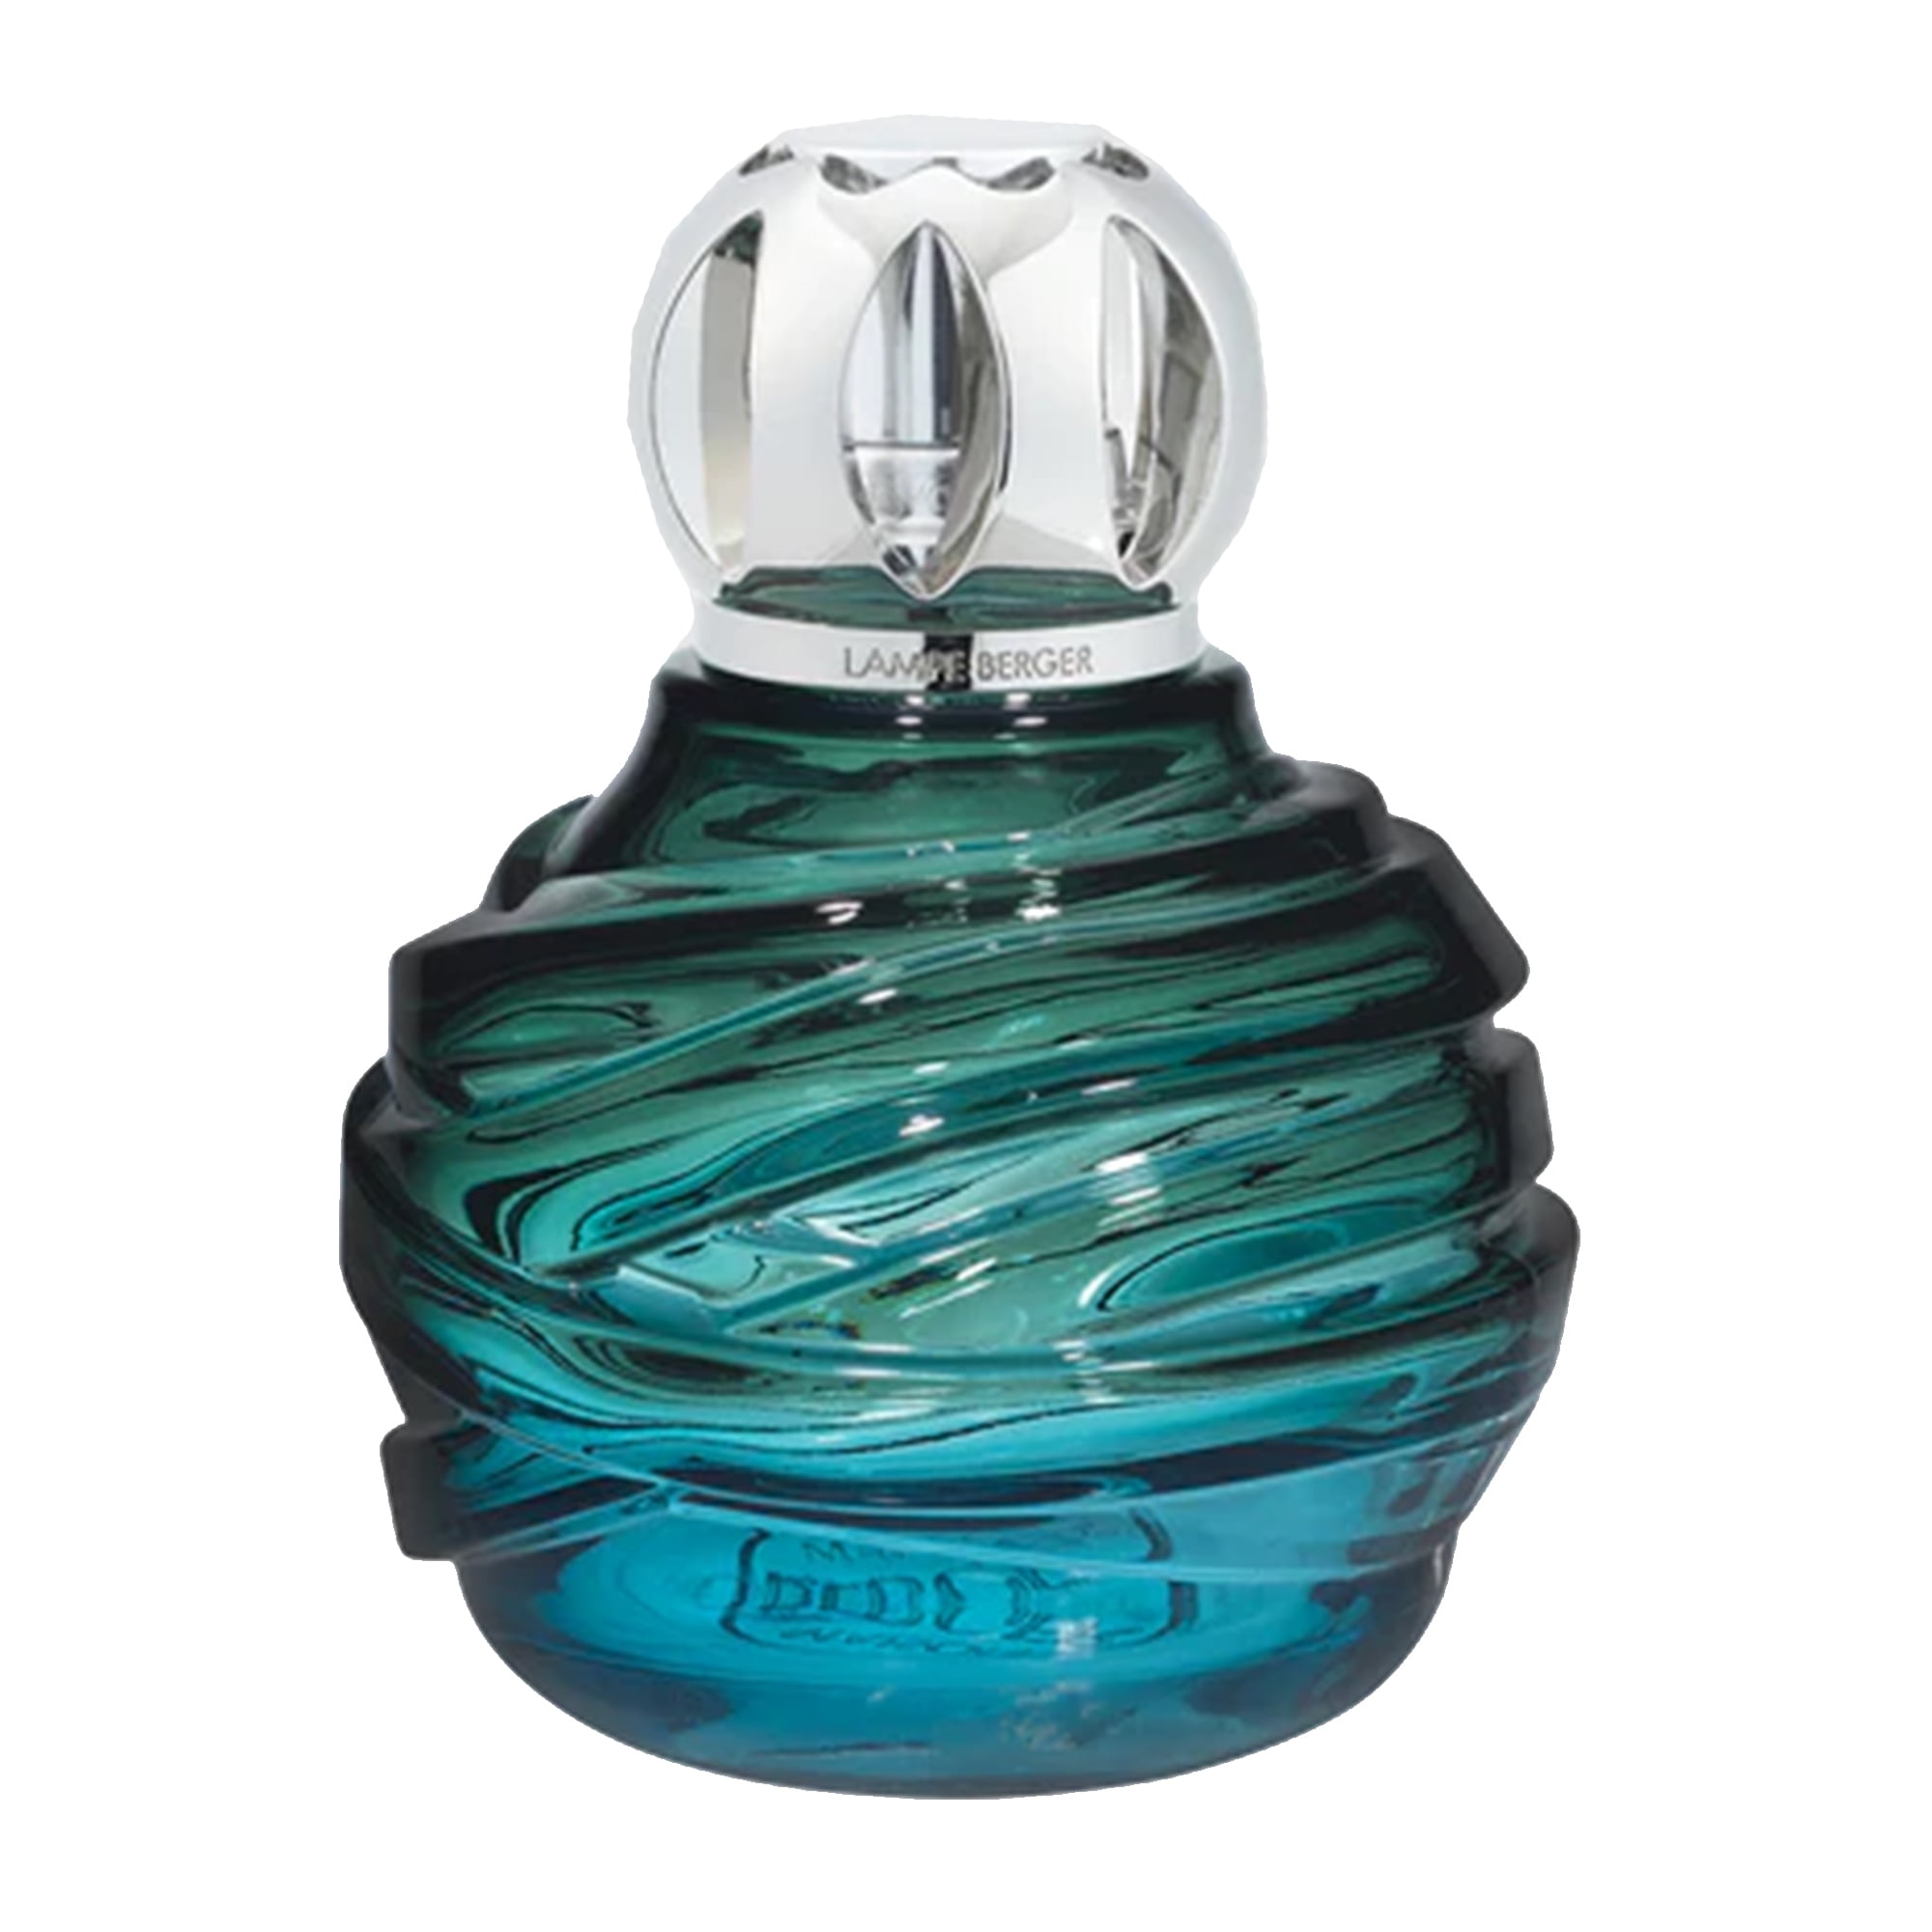 Fireplace In The Foyer - Lampe Maison Berger Fragrance - 1 Litre